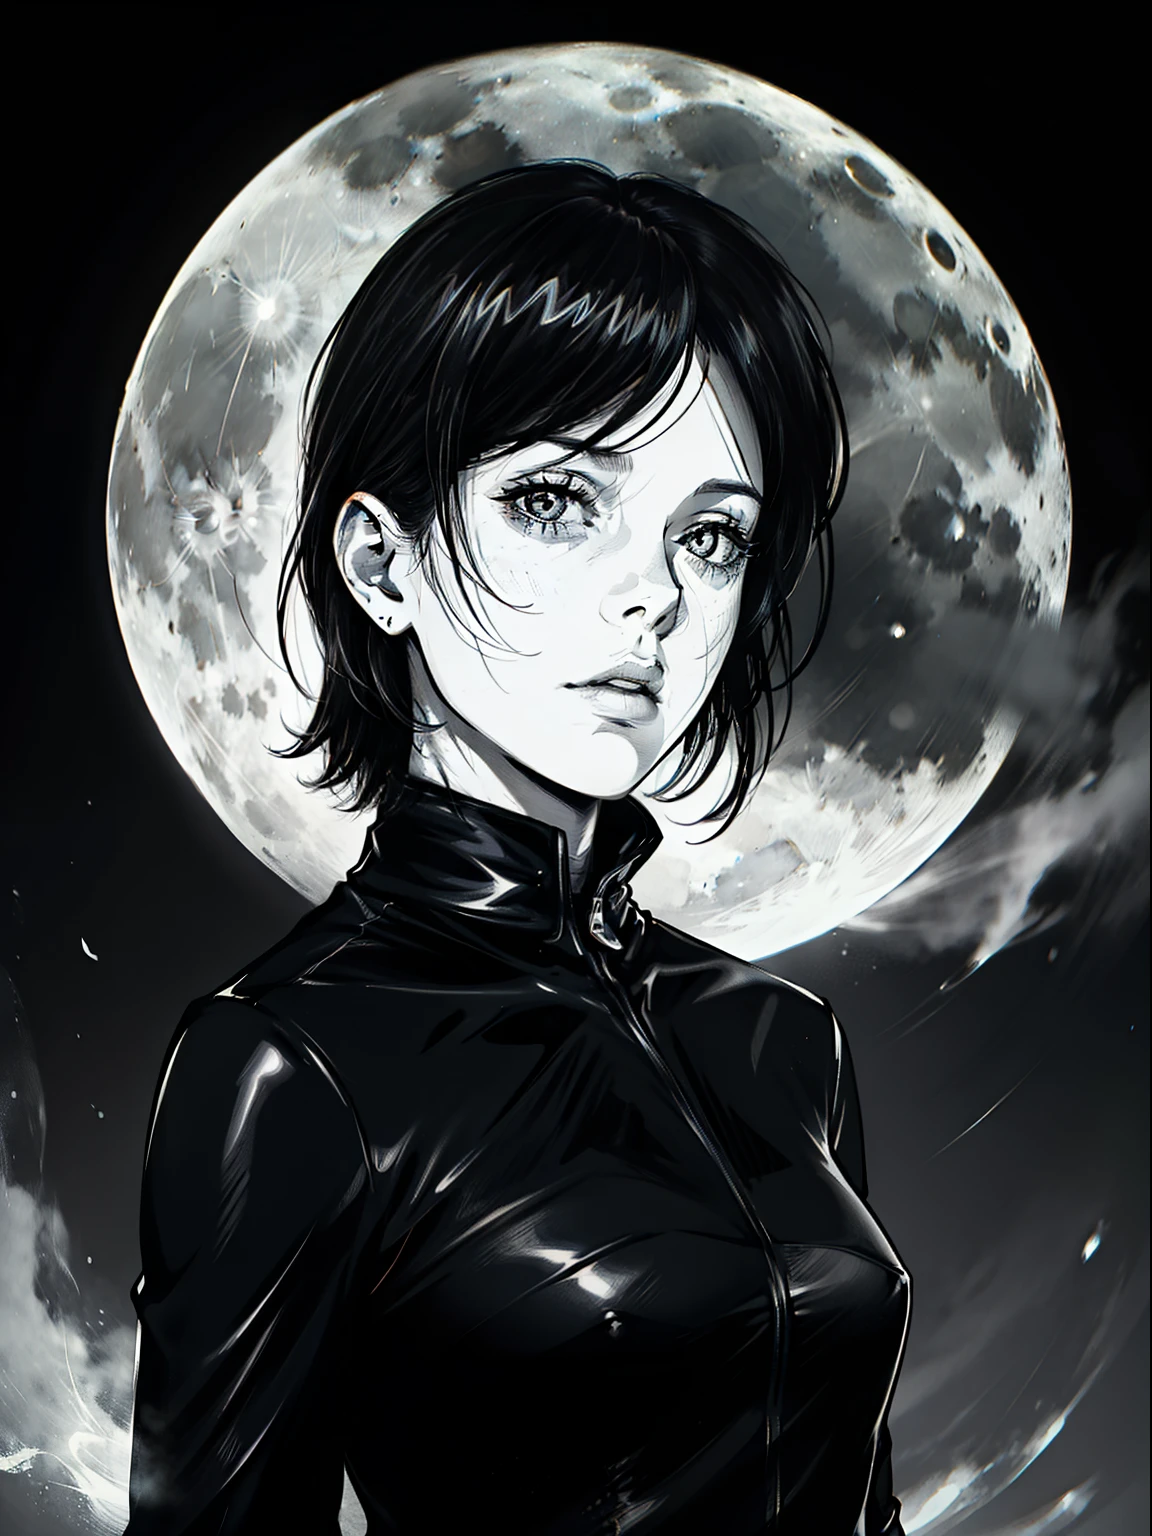 {4k image}, Kate Beckinsale (solo), 28 years old, short black hair, neutral expression, {centered image}, {face portrait}, full moon background, manga lineart (monochrome)